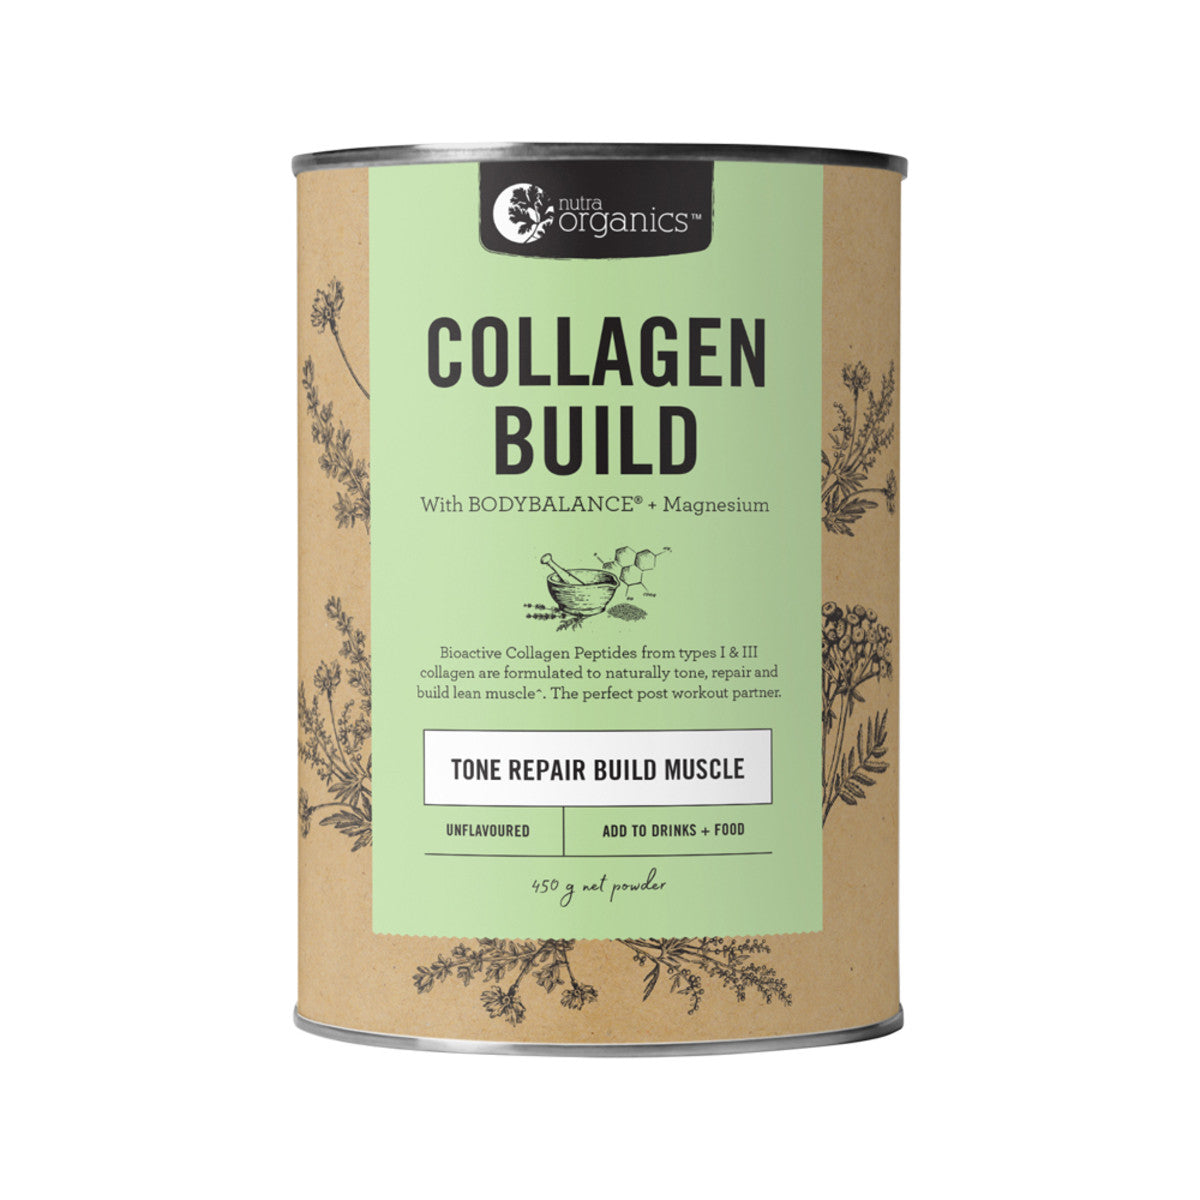 Nutra Organics Collagen Build with BodyBalance (Tone Repair Build Muscle) Unflavoured 450g Powder